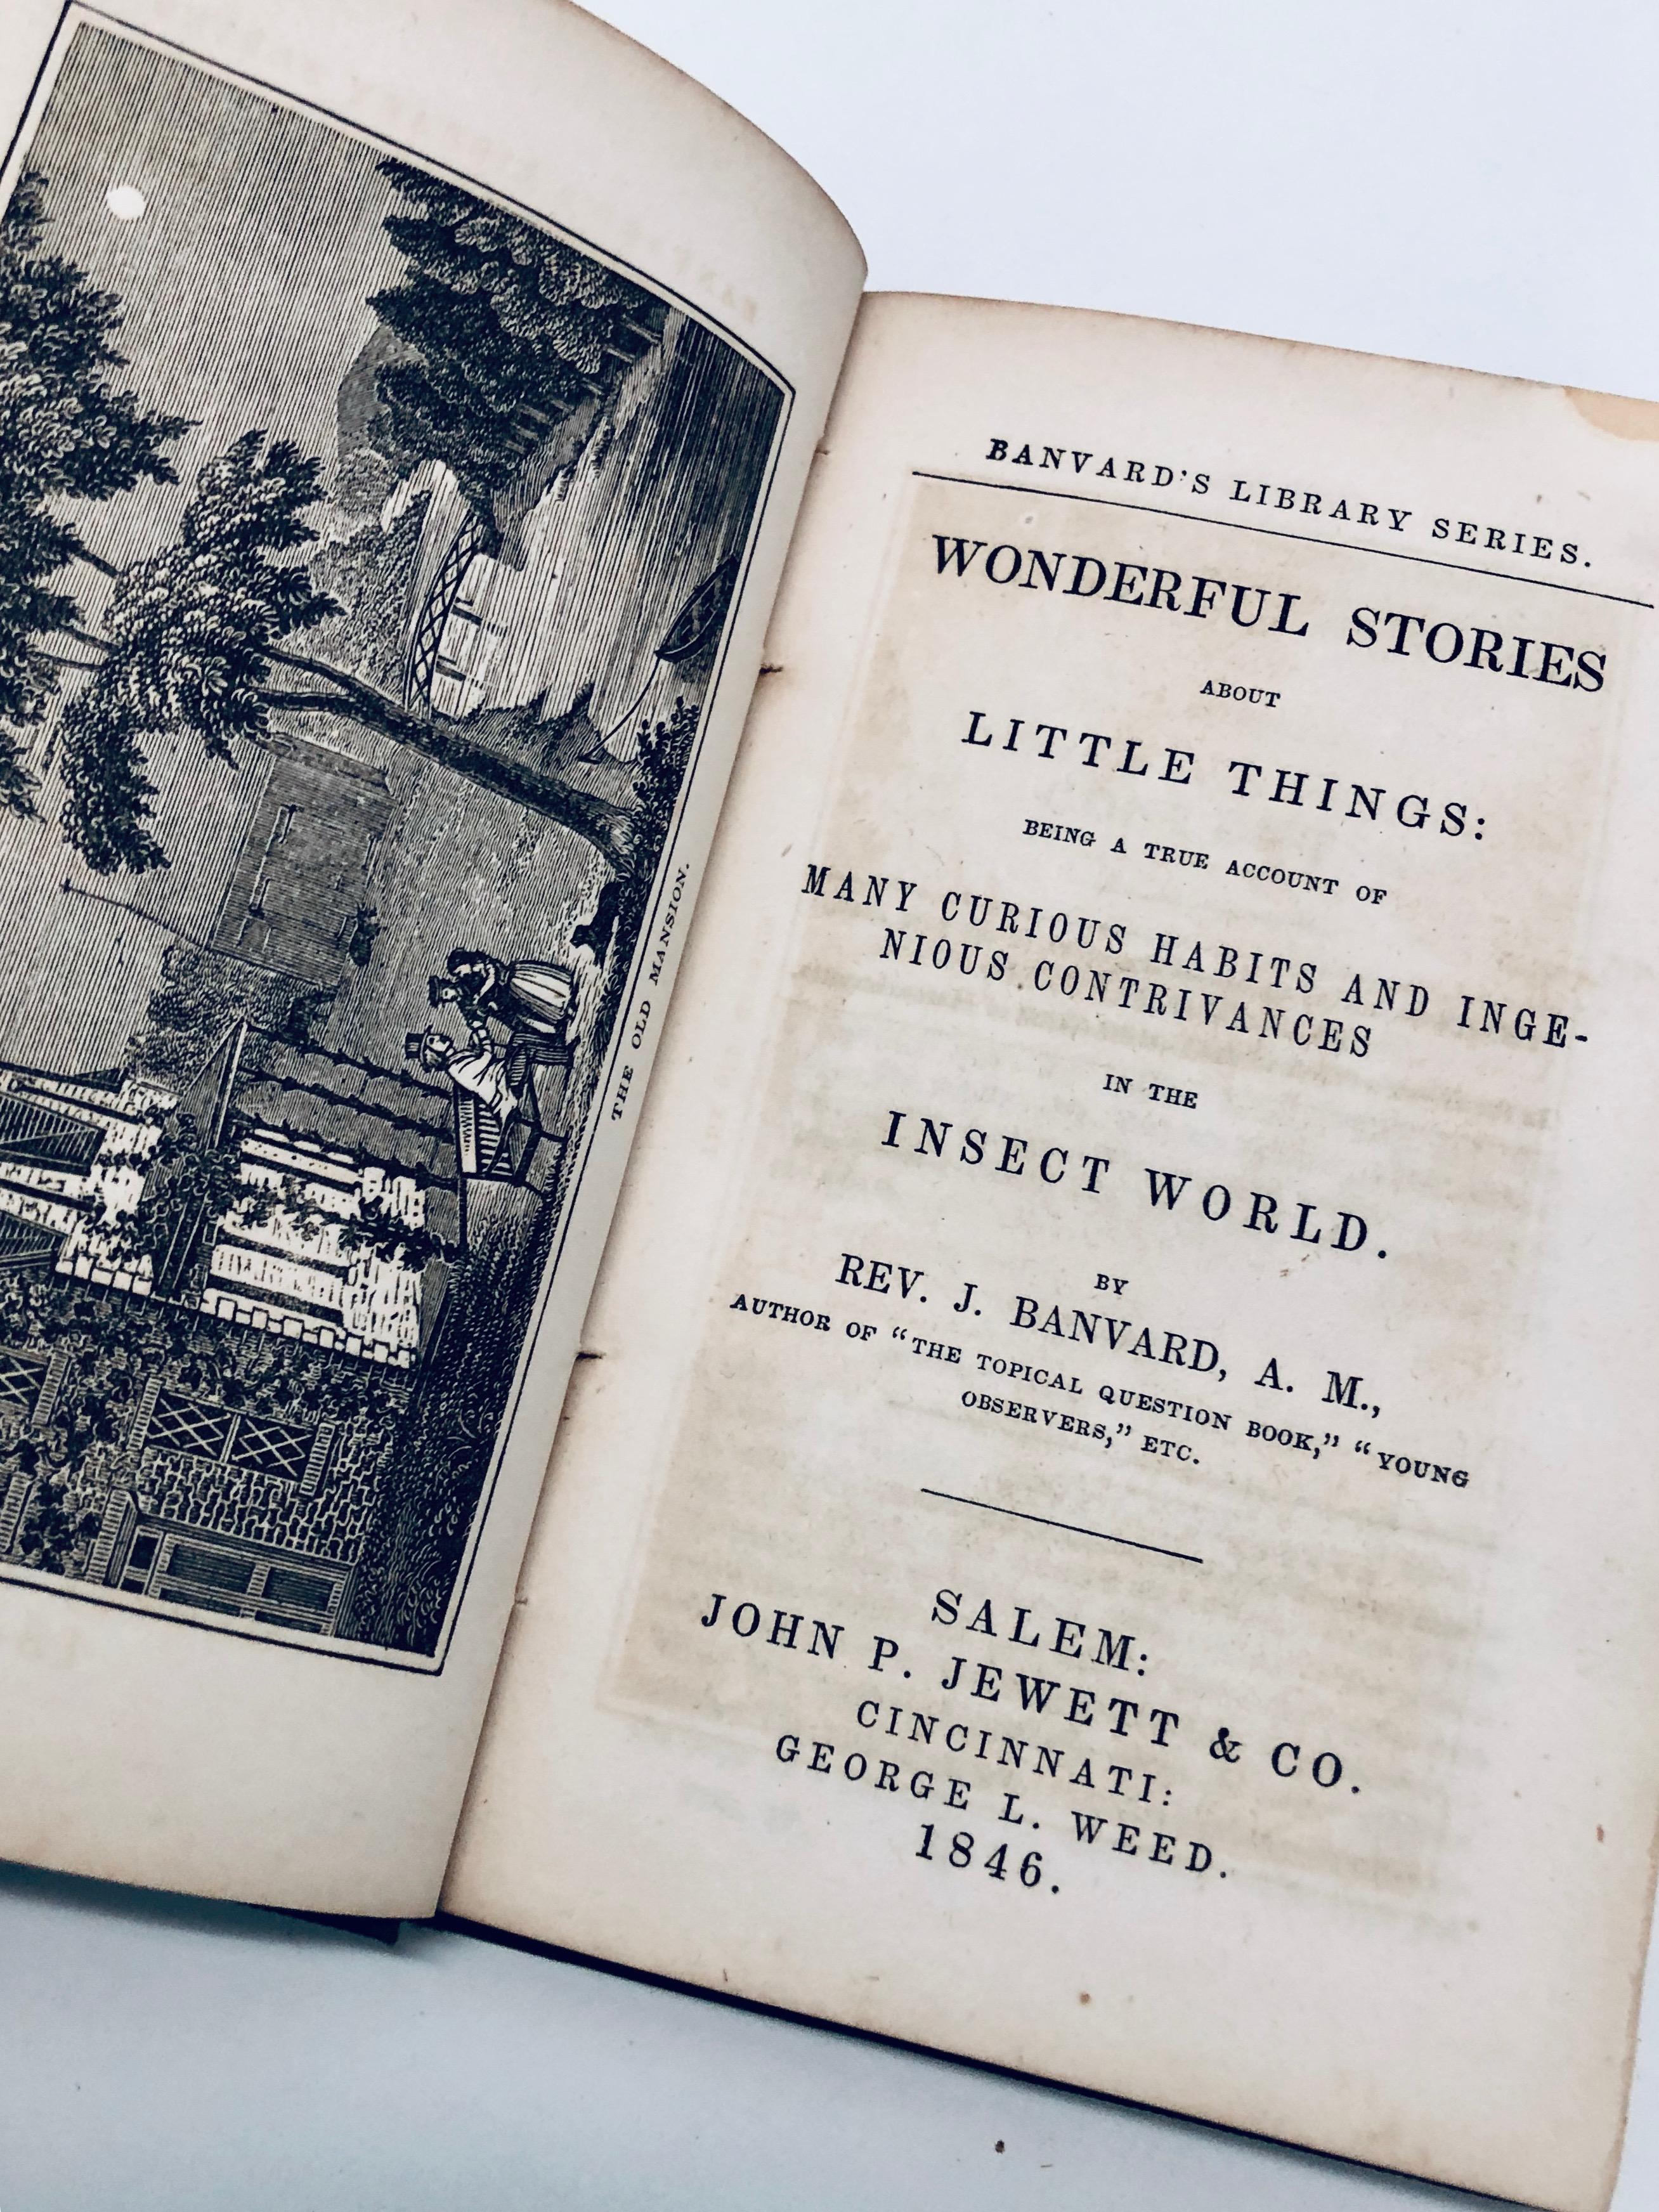 RARE Wonderful Stories About Little Things: Many Curious Habits of the Insect World (1846)